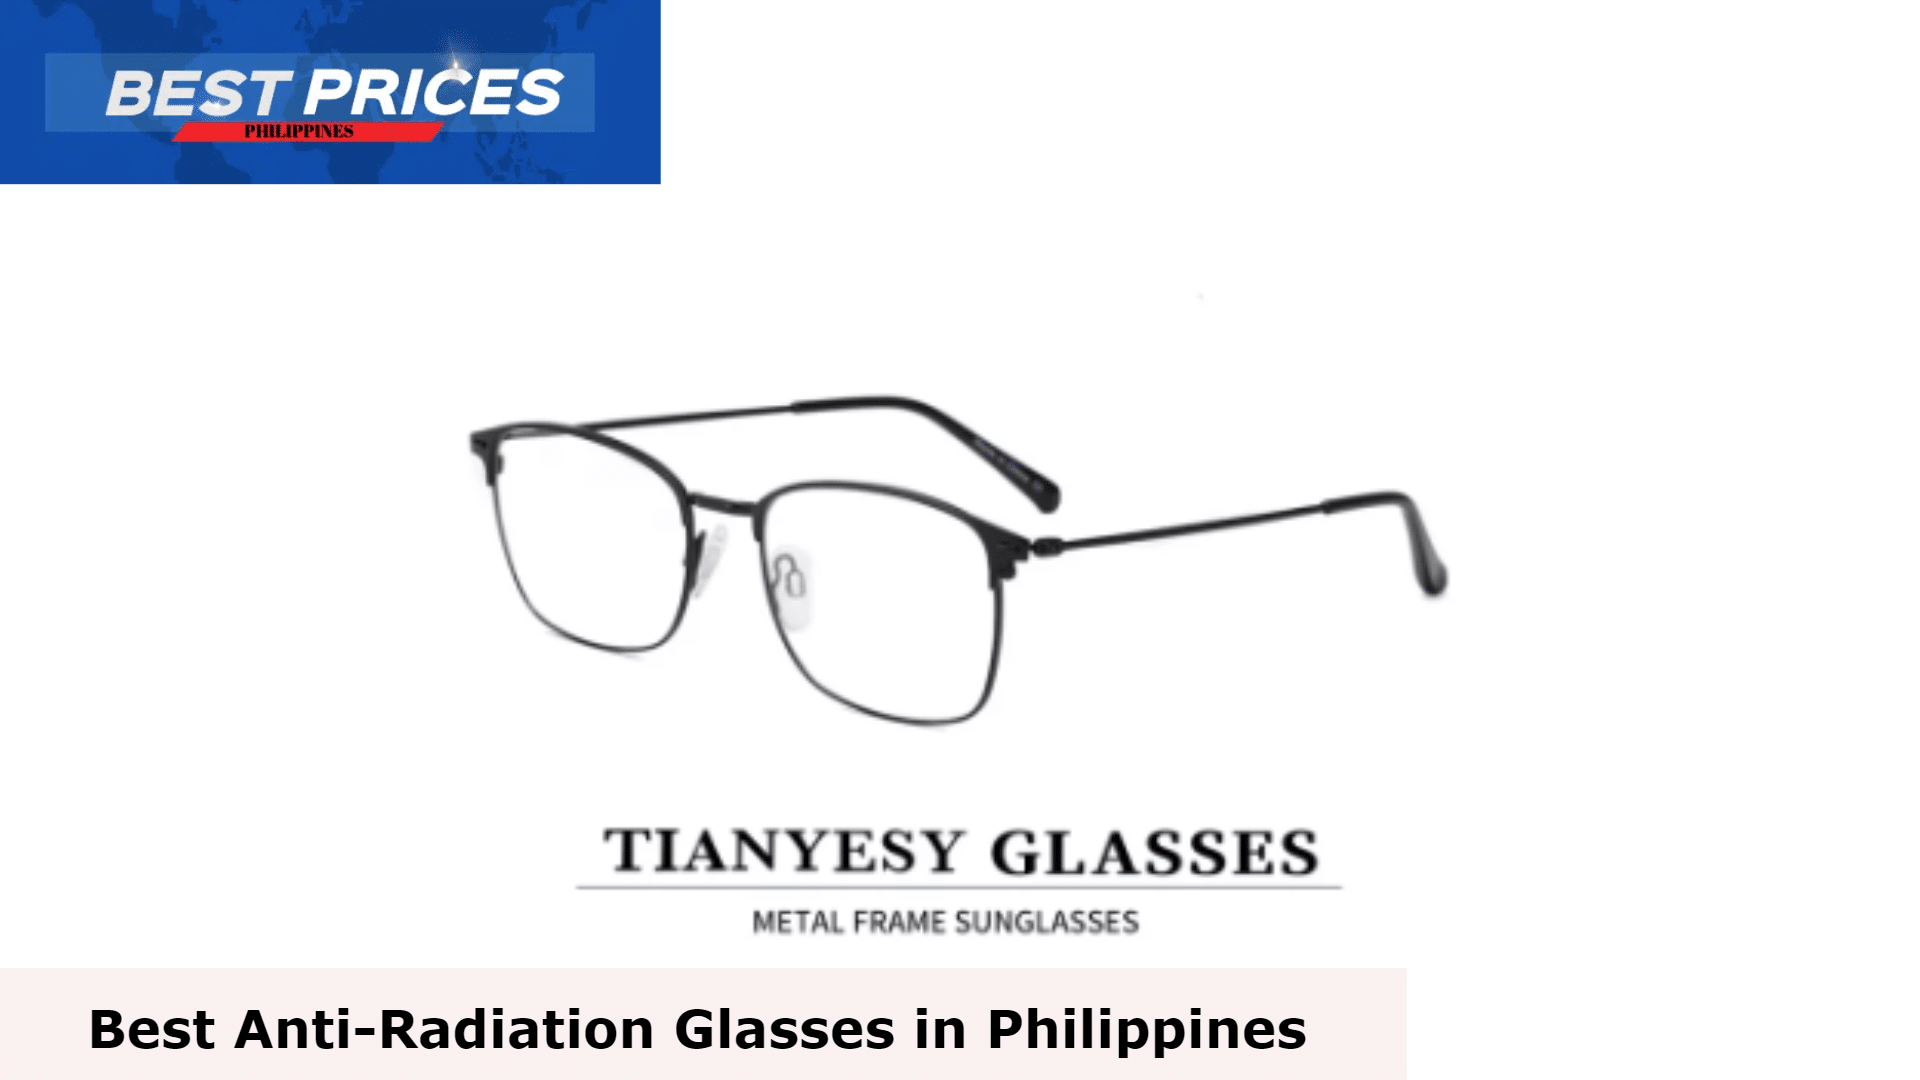 TIANYESY Photochromic Anti Radiation Glasses - Best Anti-Radiation Glasses in Philippines, Anti-Radiation Glasses Philippines, best anti radiation glasses philippines, Do anti-radiation glasses works?, What is the best color for anti-radiation glasses?, How do you know if anti-radiation glasses are legit?, Is blue light glasses same as anti-radiation?, Best Anti-Blue Light Glasses Philippines, How to identify anti radiation glasses, Are anti-radiation glasses legit?, Can glasses reduce radiation?, How can you tell real anti-radiation glasses?, Best brand for anti radiation glasses Philippines, anti radiation glasses for kids,